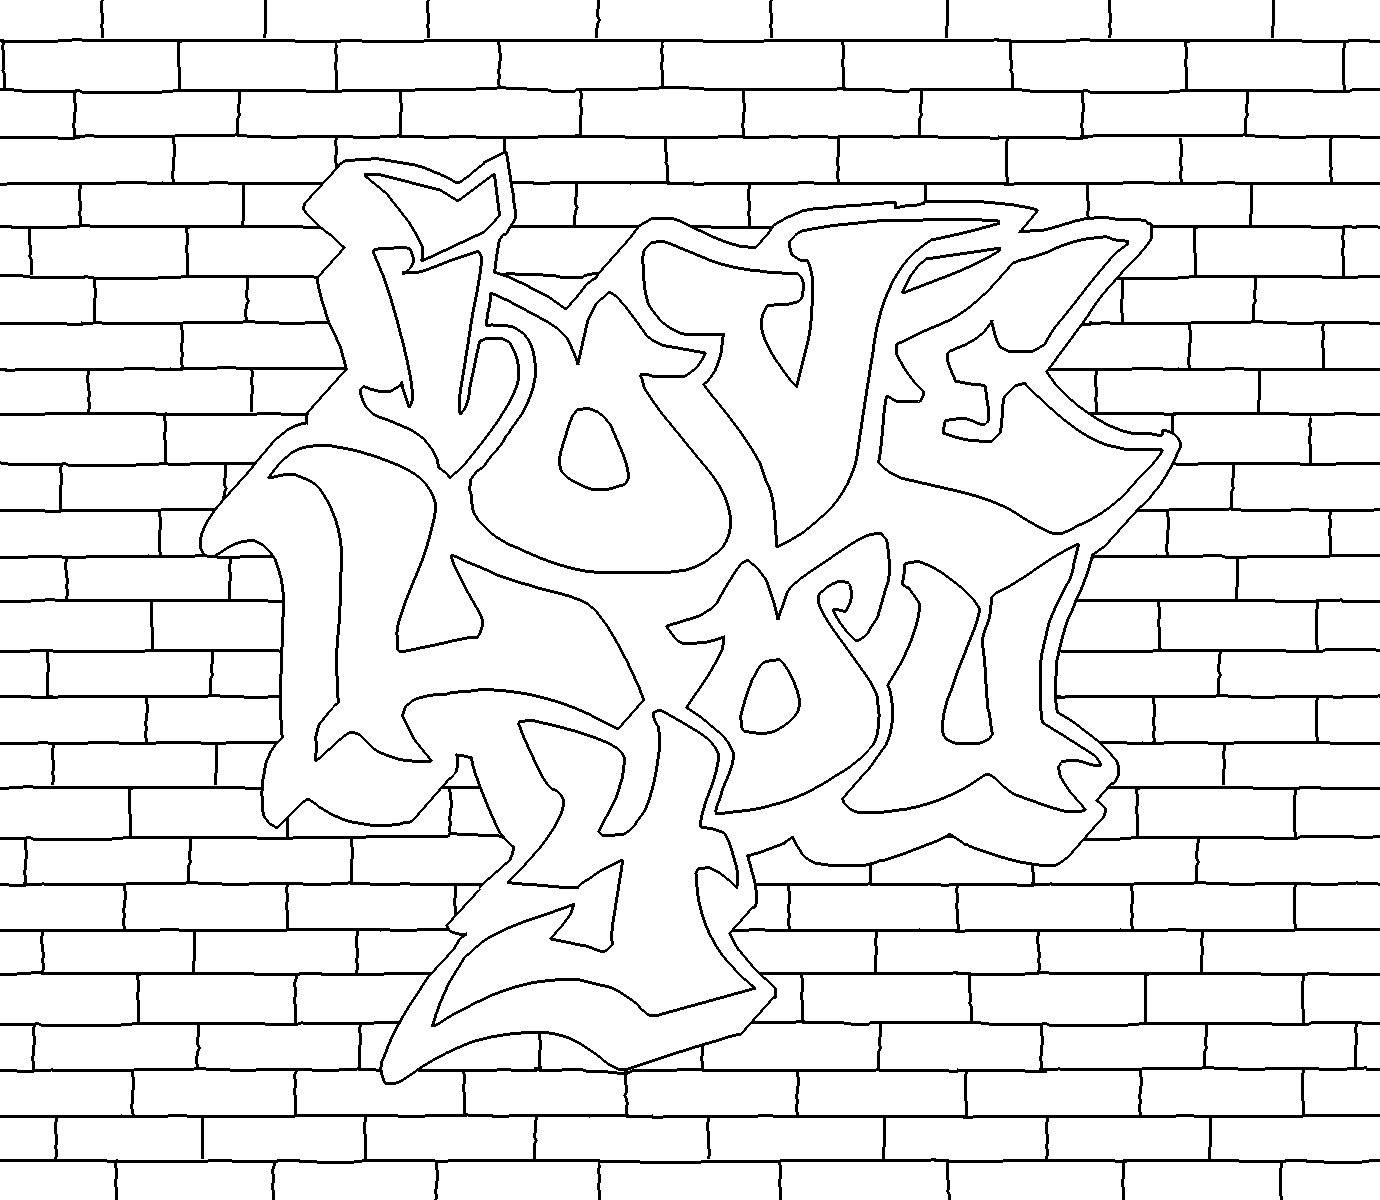 graffiti coloring pages for teens and adults best